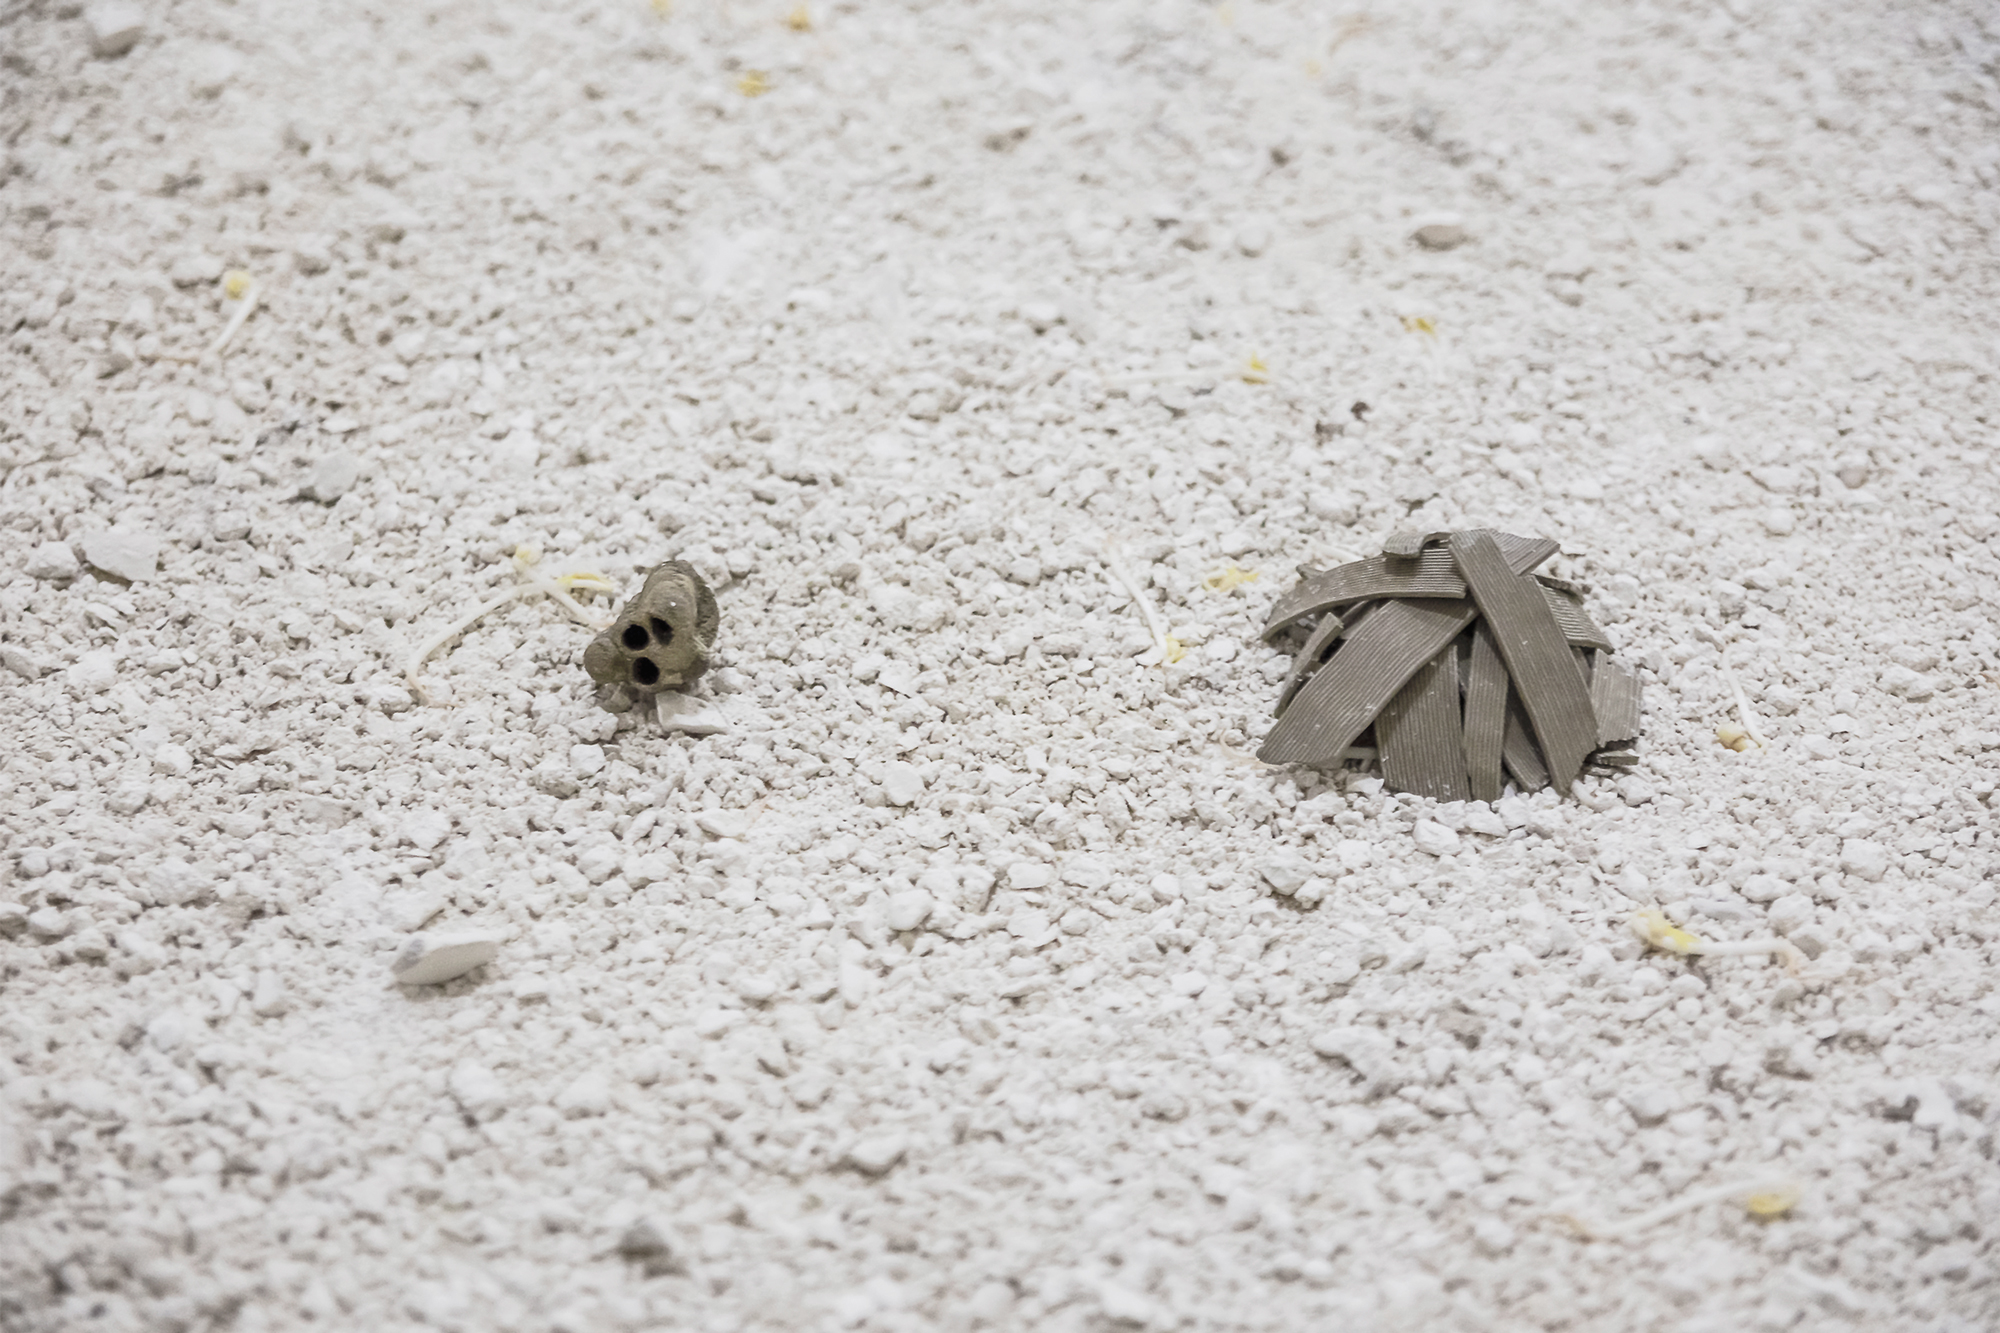   il chiaritoio,  mud wasp nest, 3D printed mud fragments, travertine dust, sprouts 